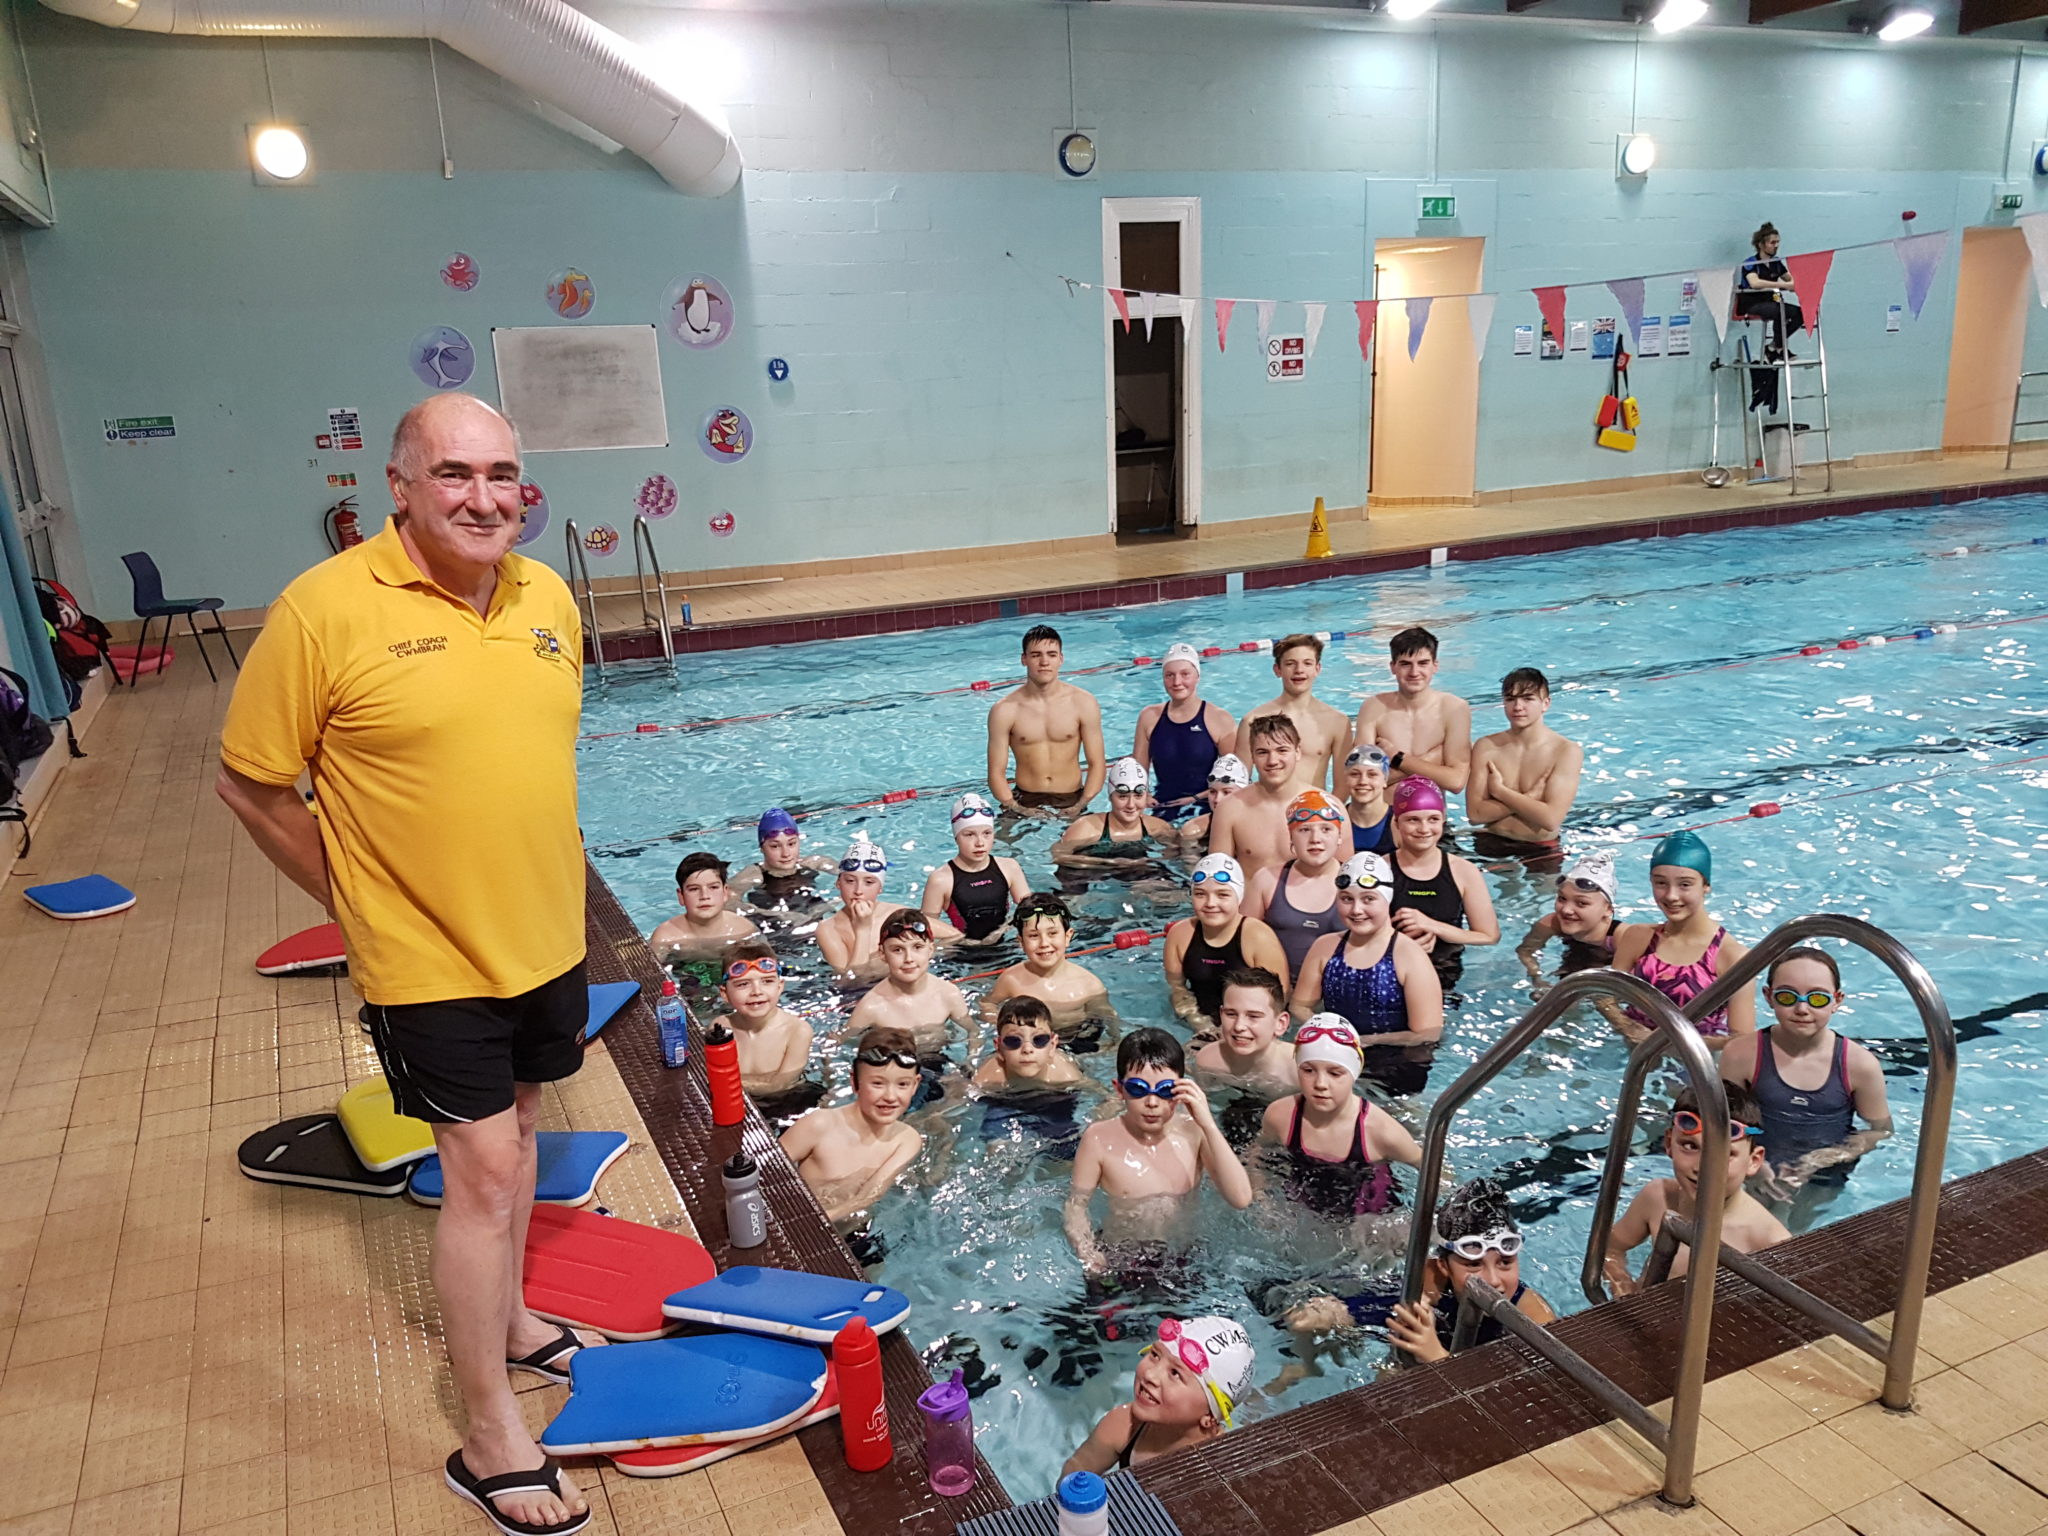 Gerald Sims, head coach at Cwmbran Otters Swimming Club